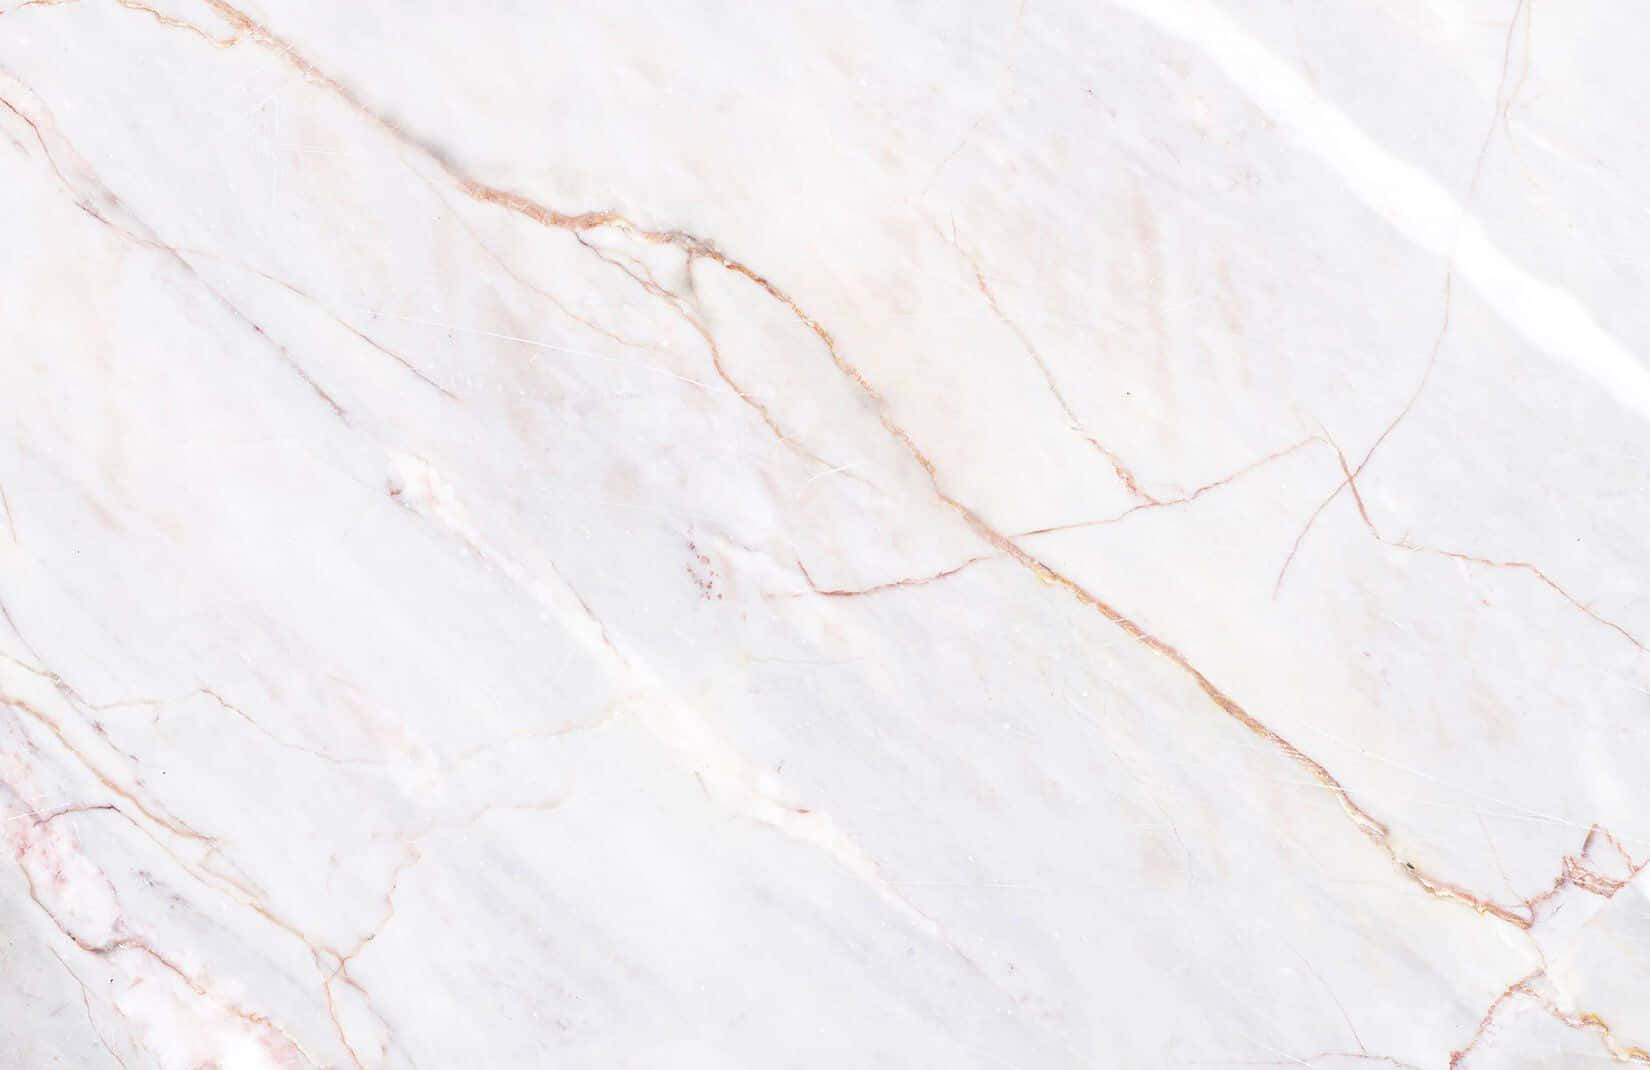 Marble Texture Pictures